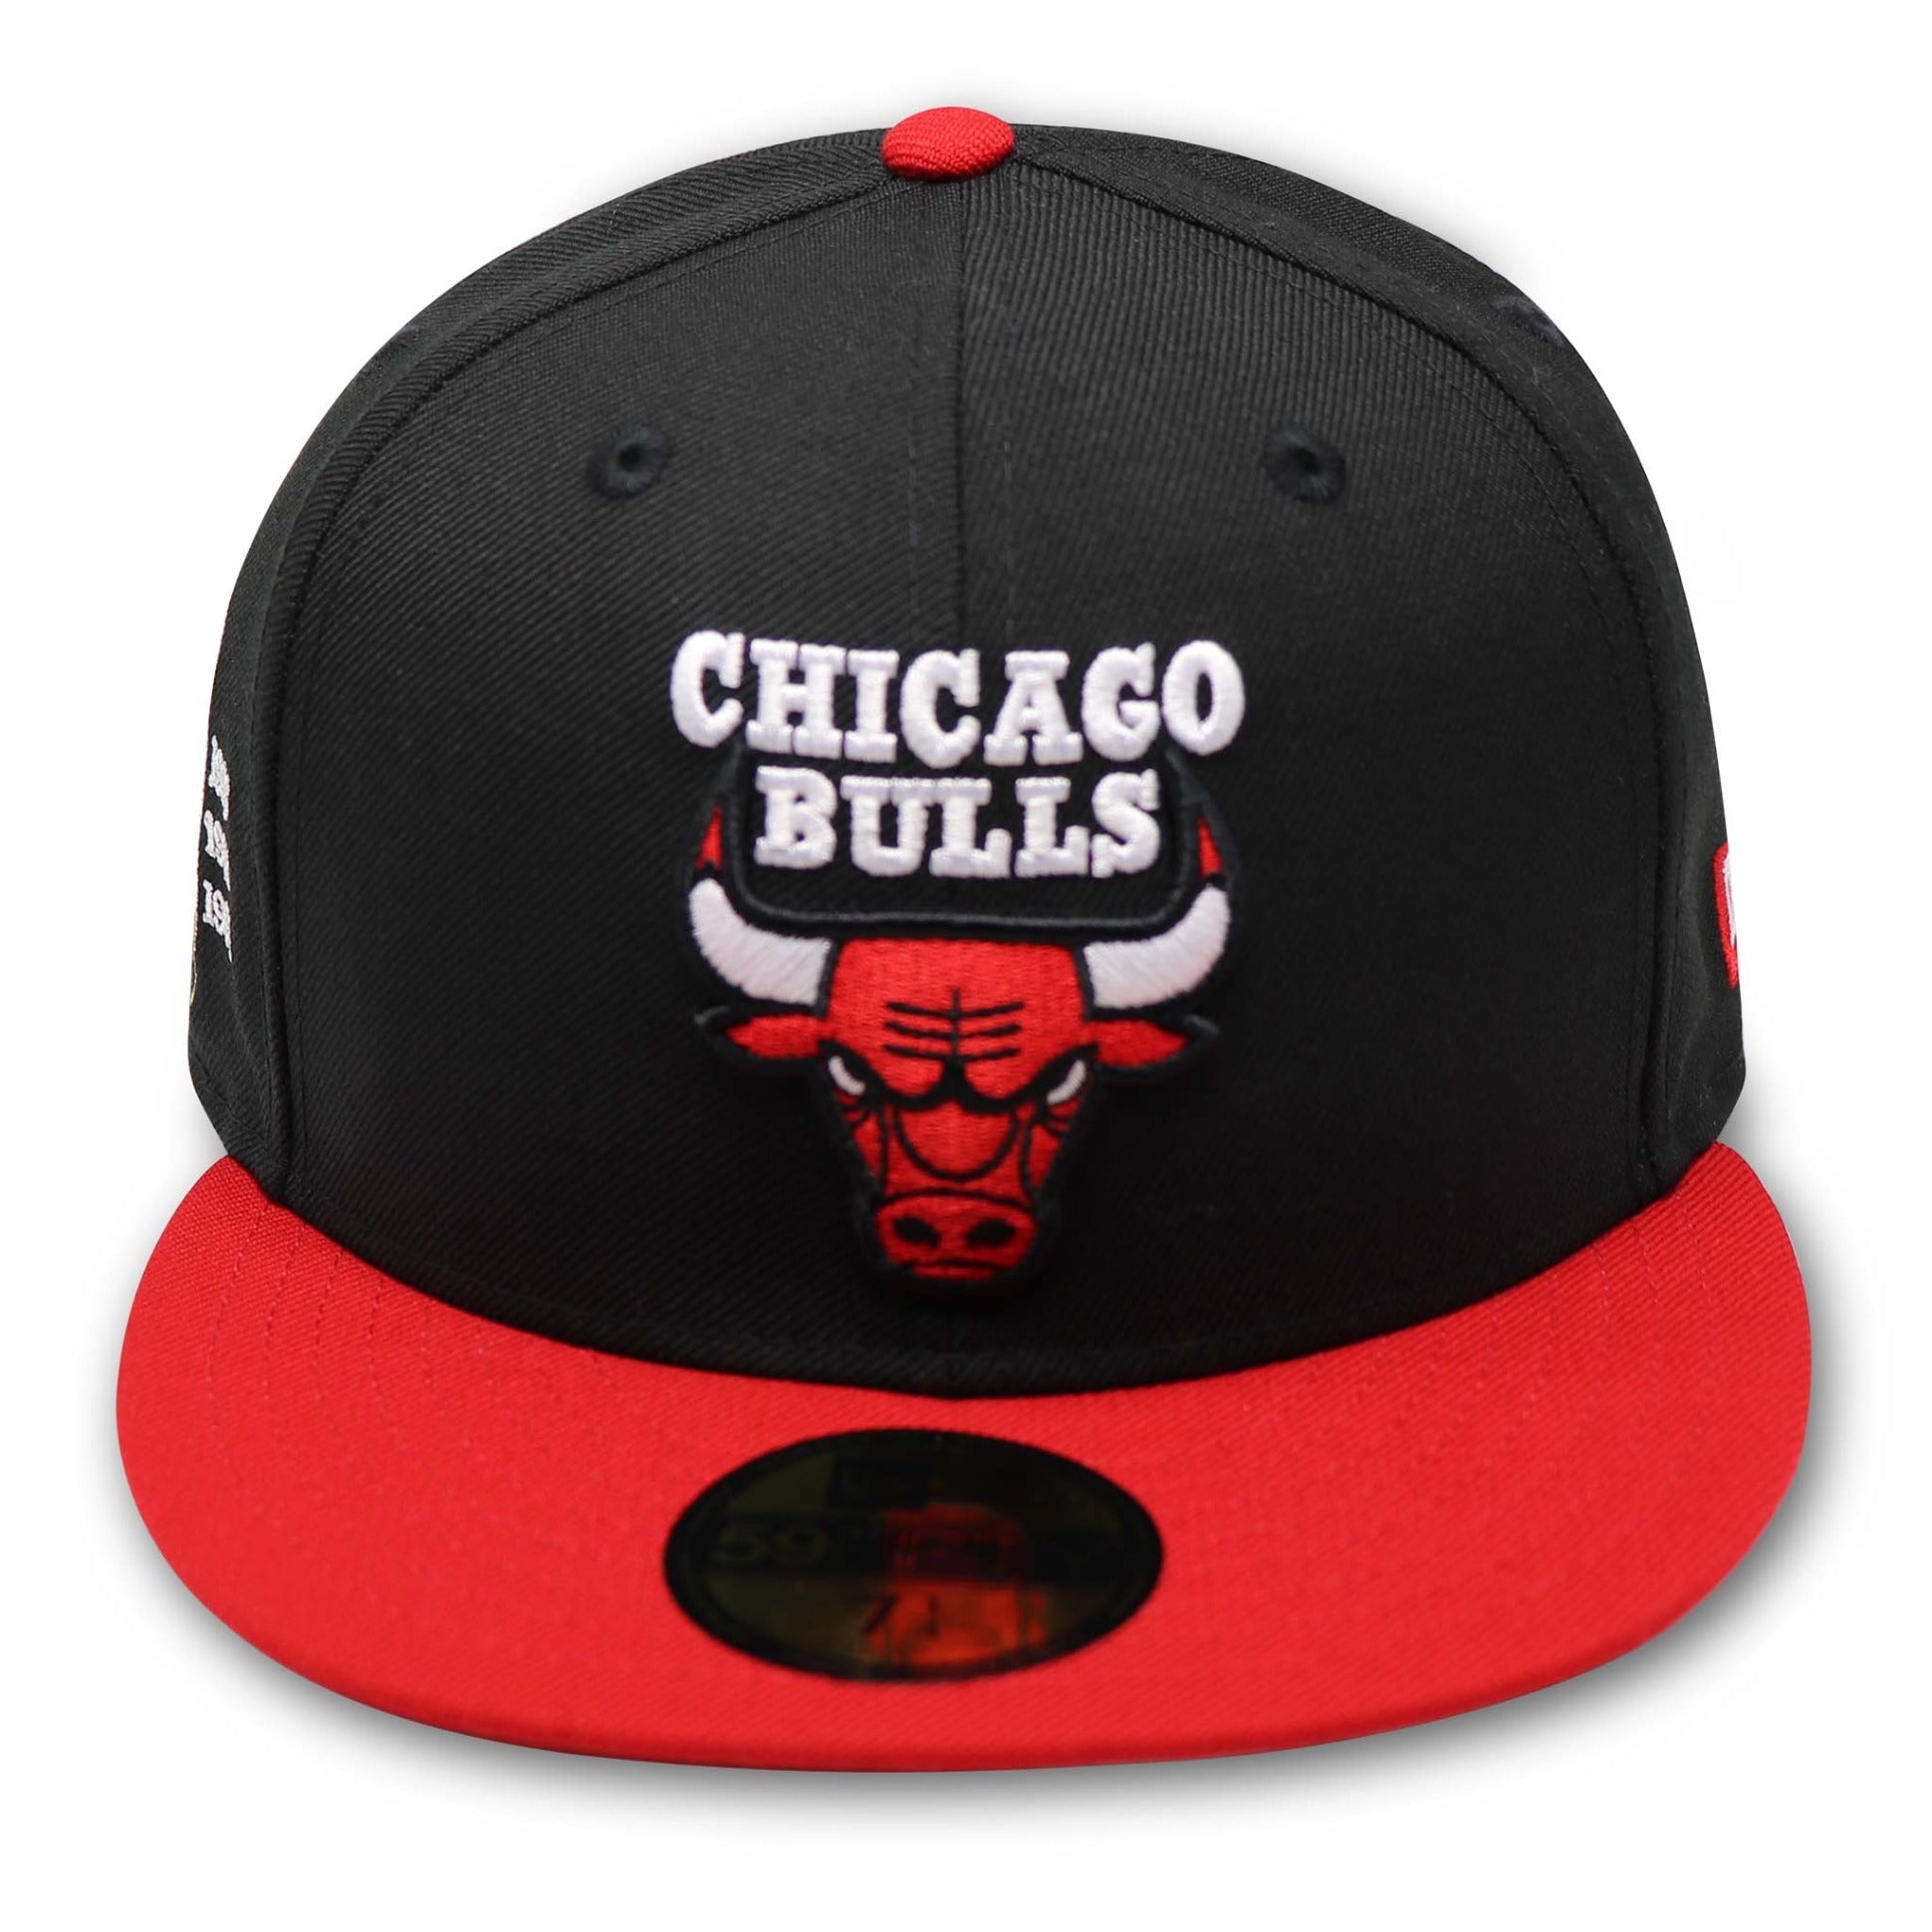 CHICAGO BULLS (6X CHAMPS "DYNASTY") NEW ERA 59FIFTY FITTED